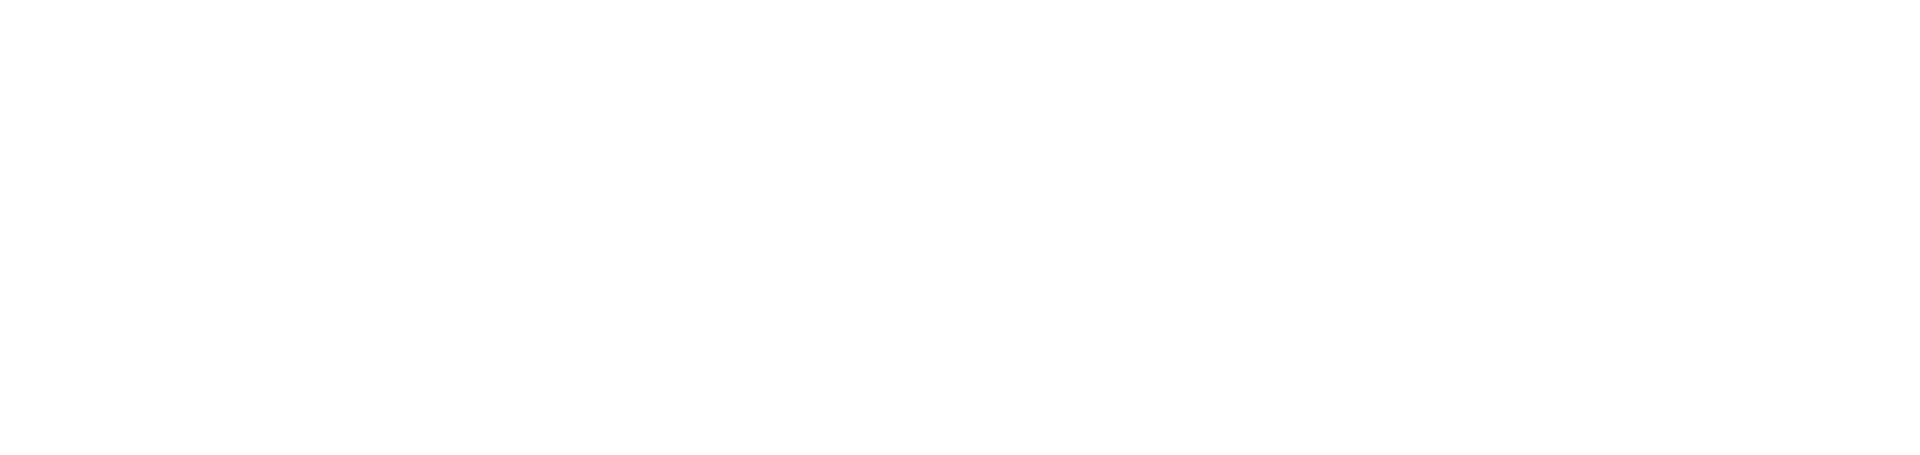 Blinds Couture white logo